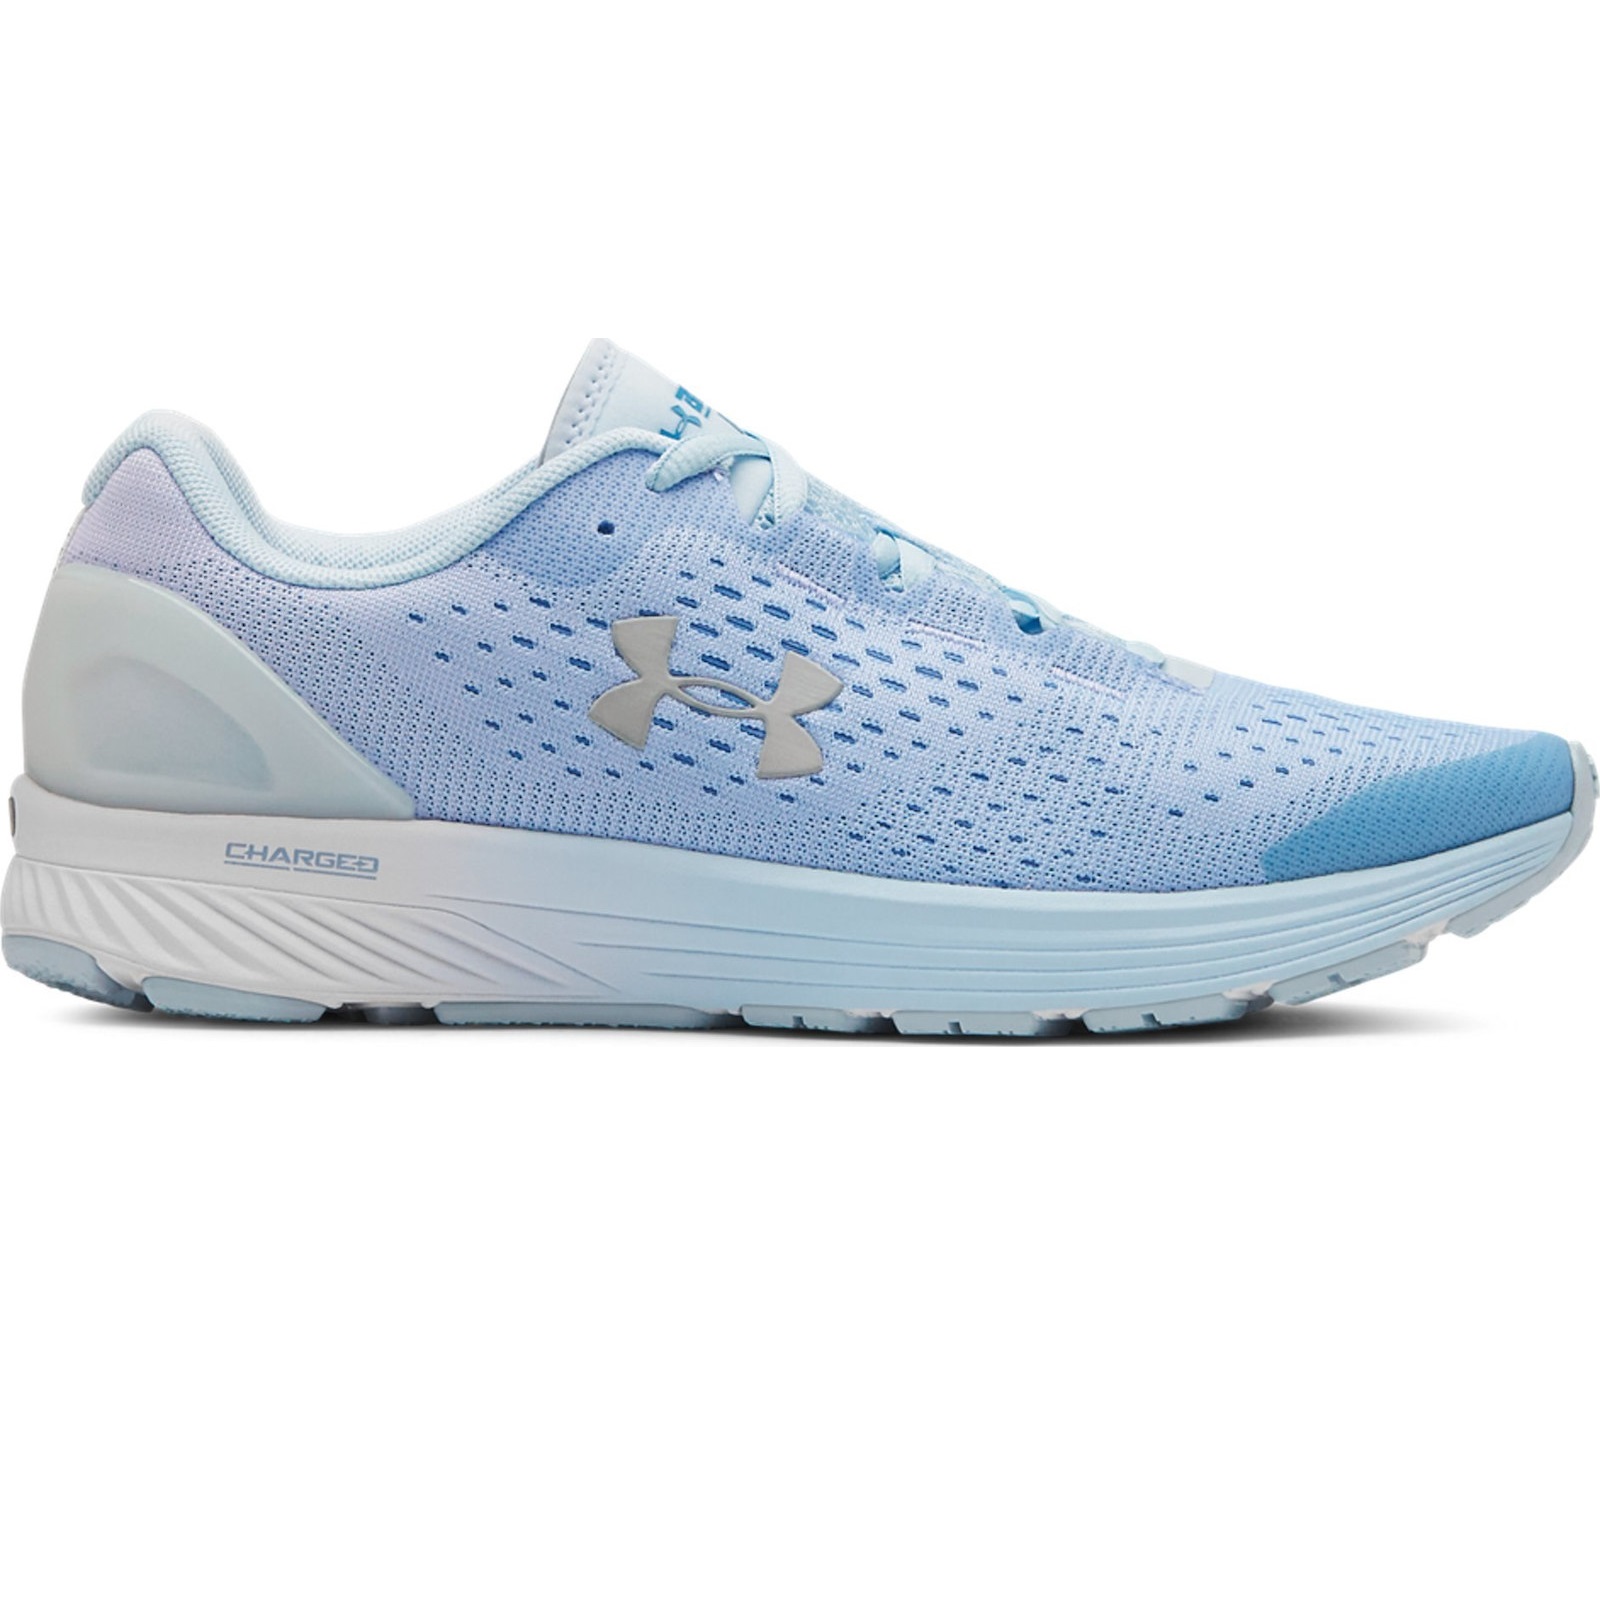 Incaltaminte De Alergare -  under armour Charged Bandit 4 Running Shoes 0357